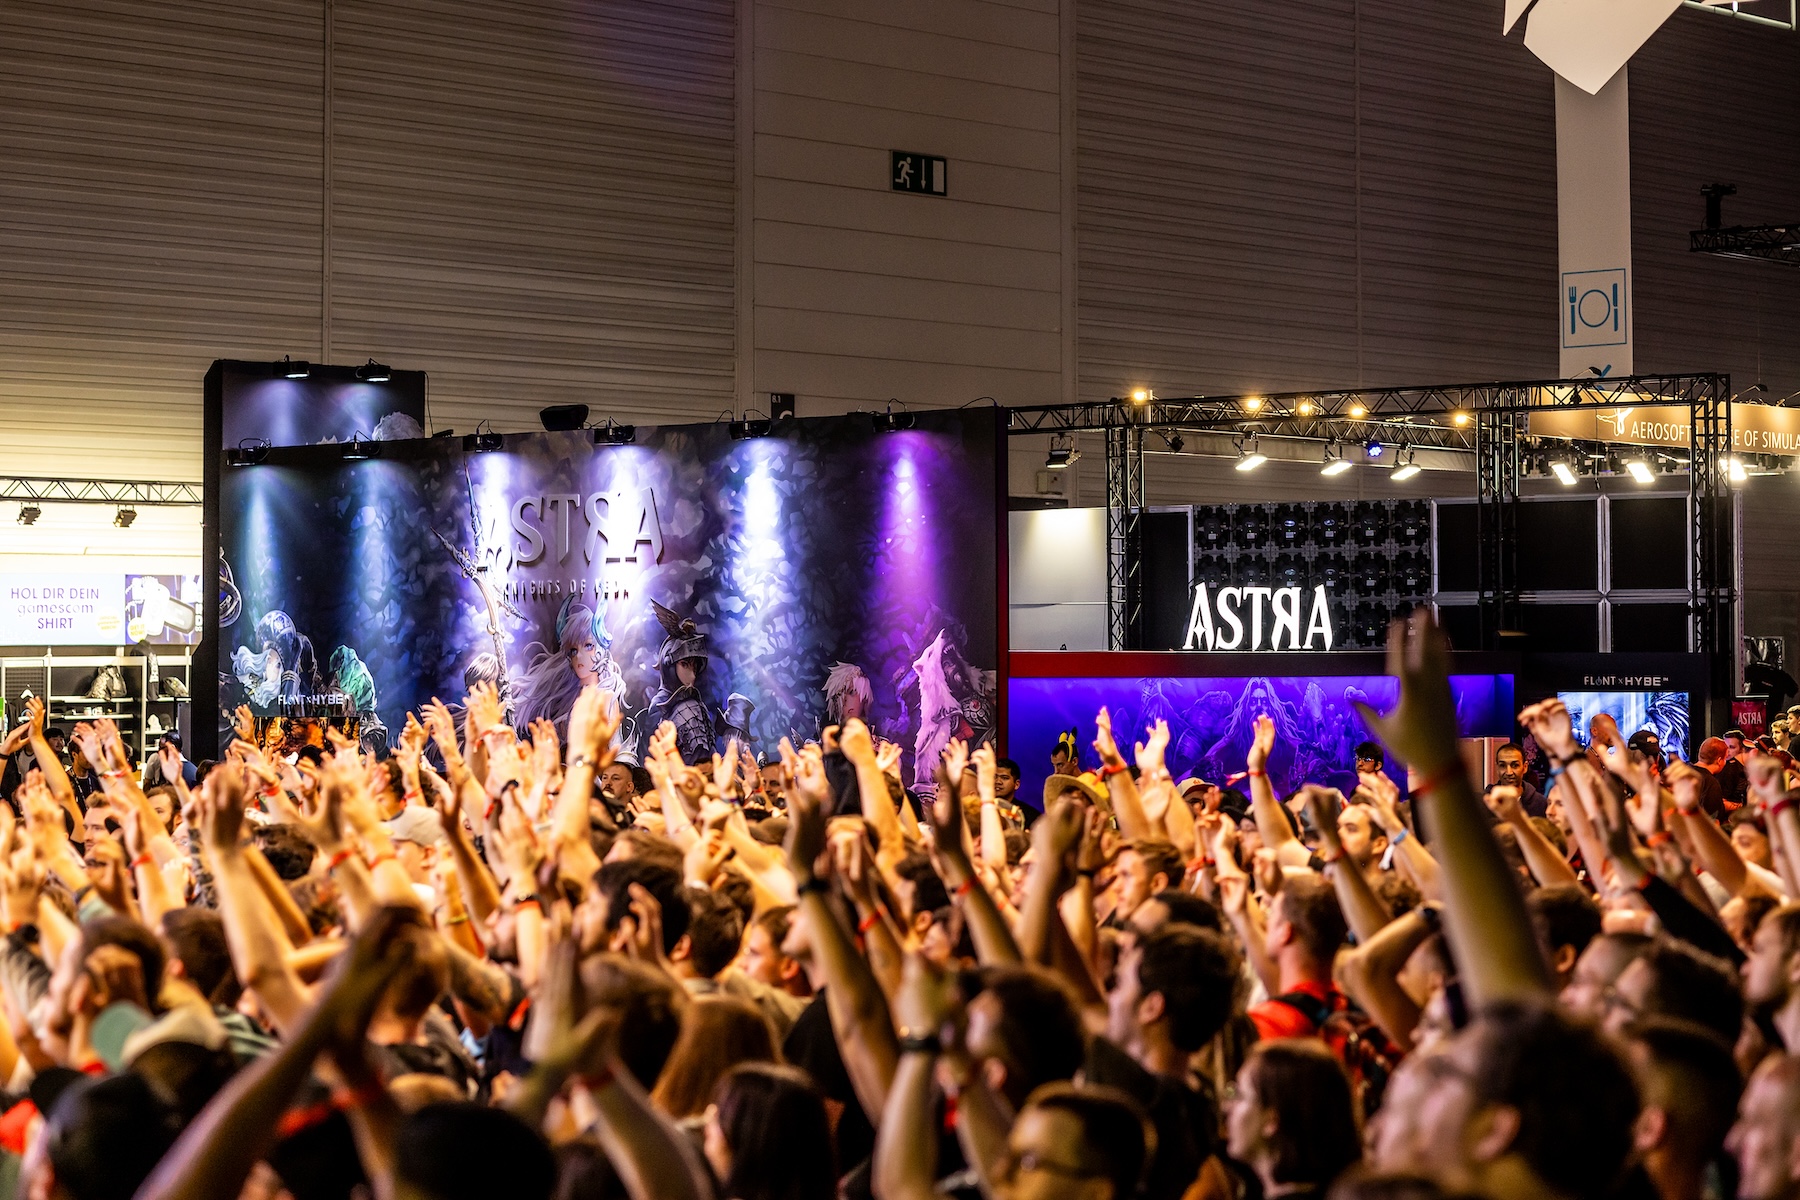 Gamescom Exhibitors Guide_people hands up, ASTRA booth is behind people